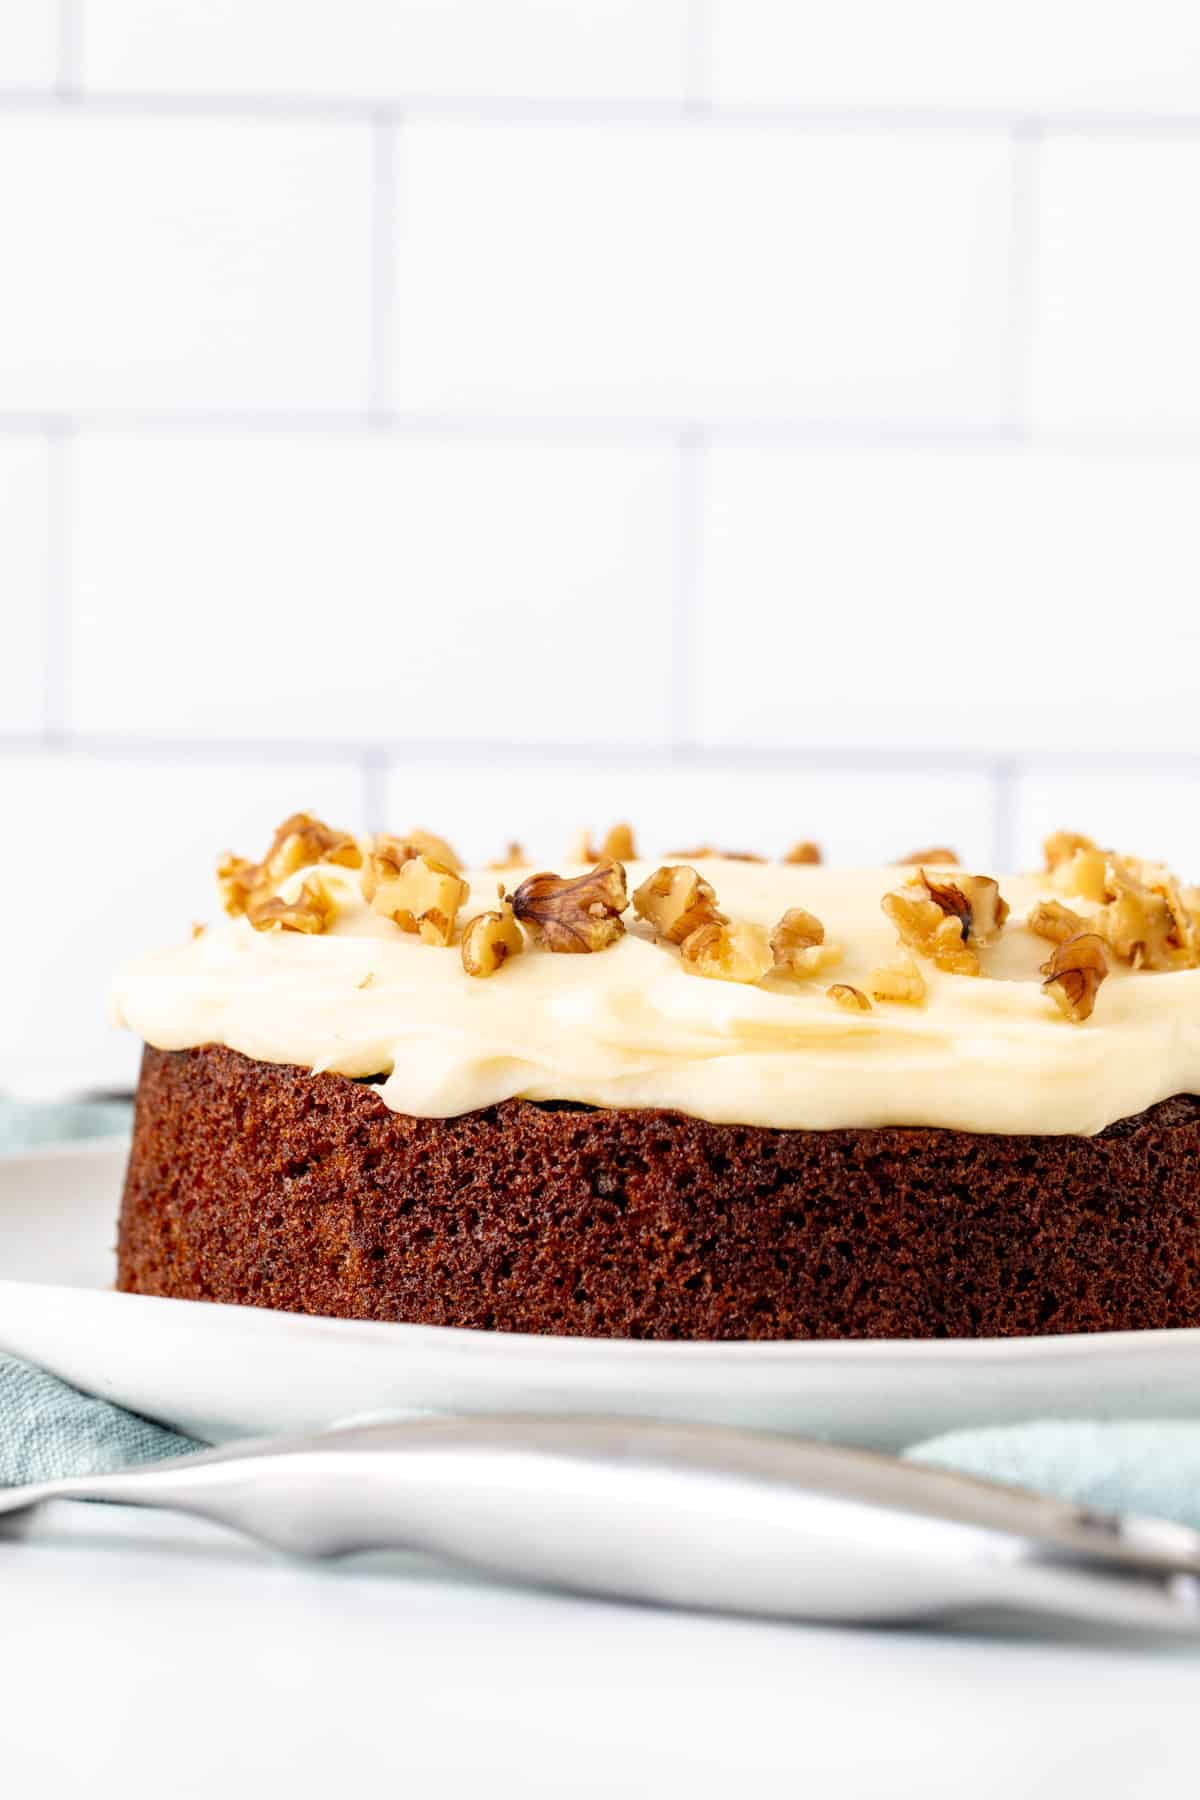 6-inch round carrot cake on a plate, topped with cream cheese frosting and walnuts